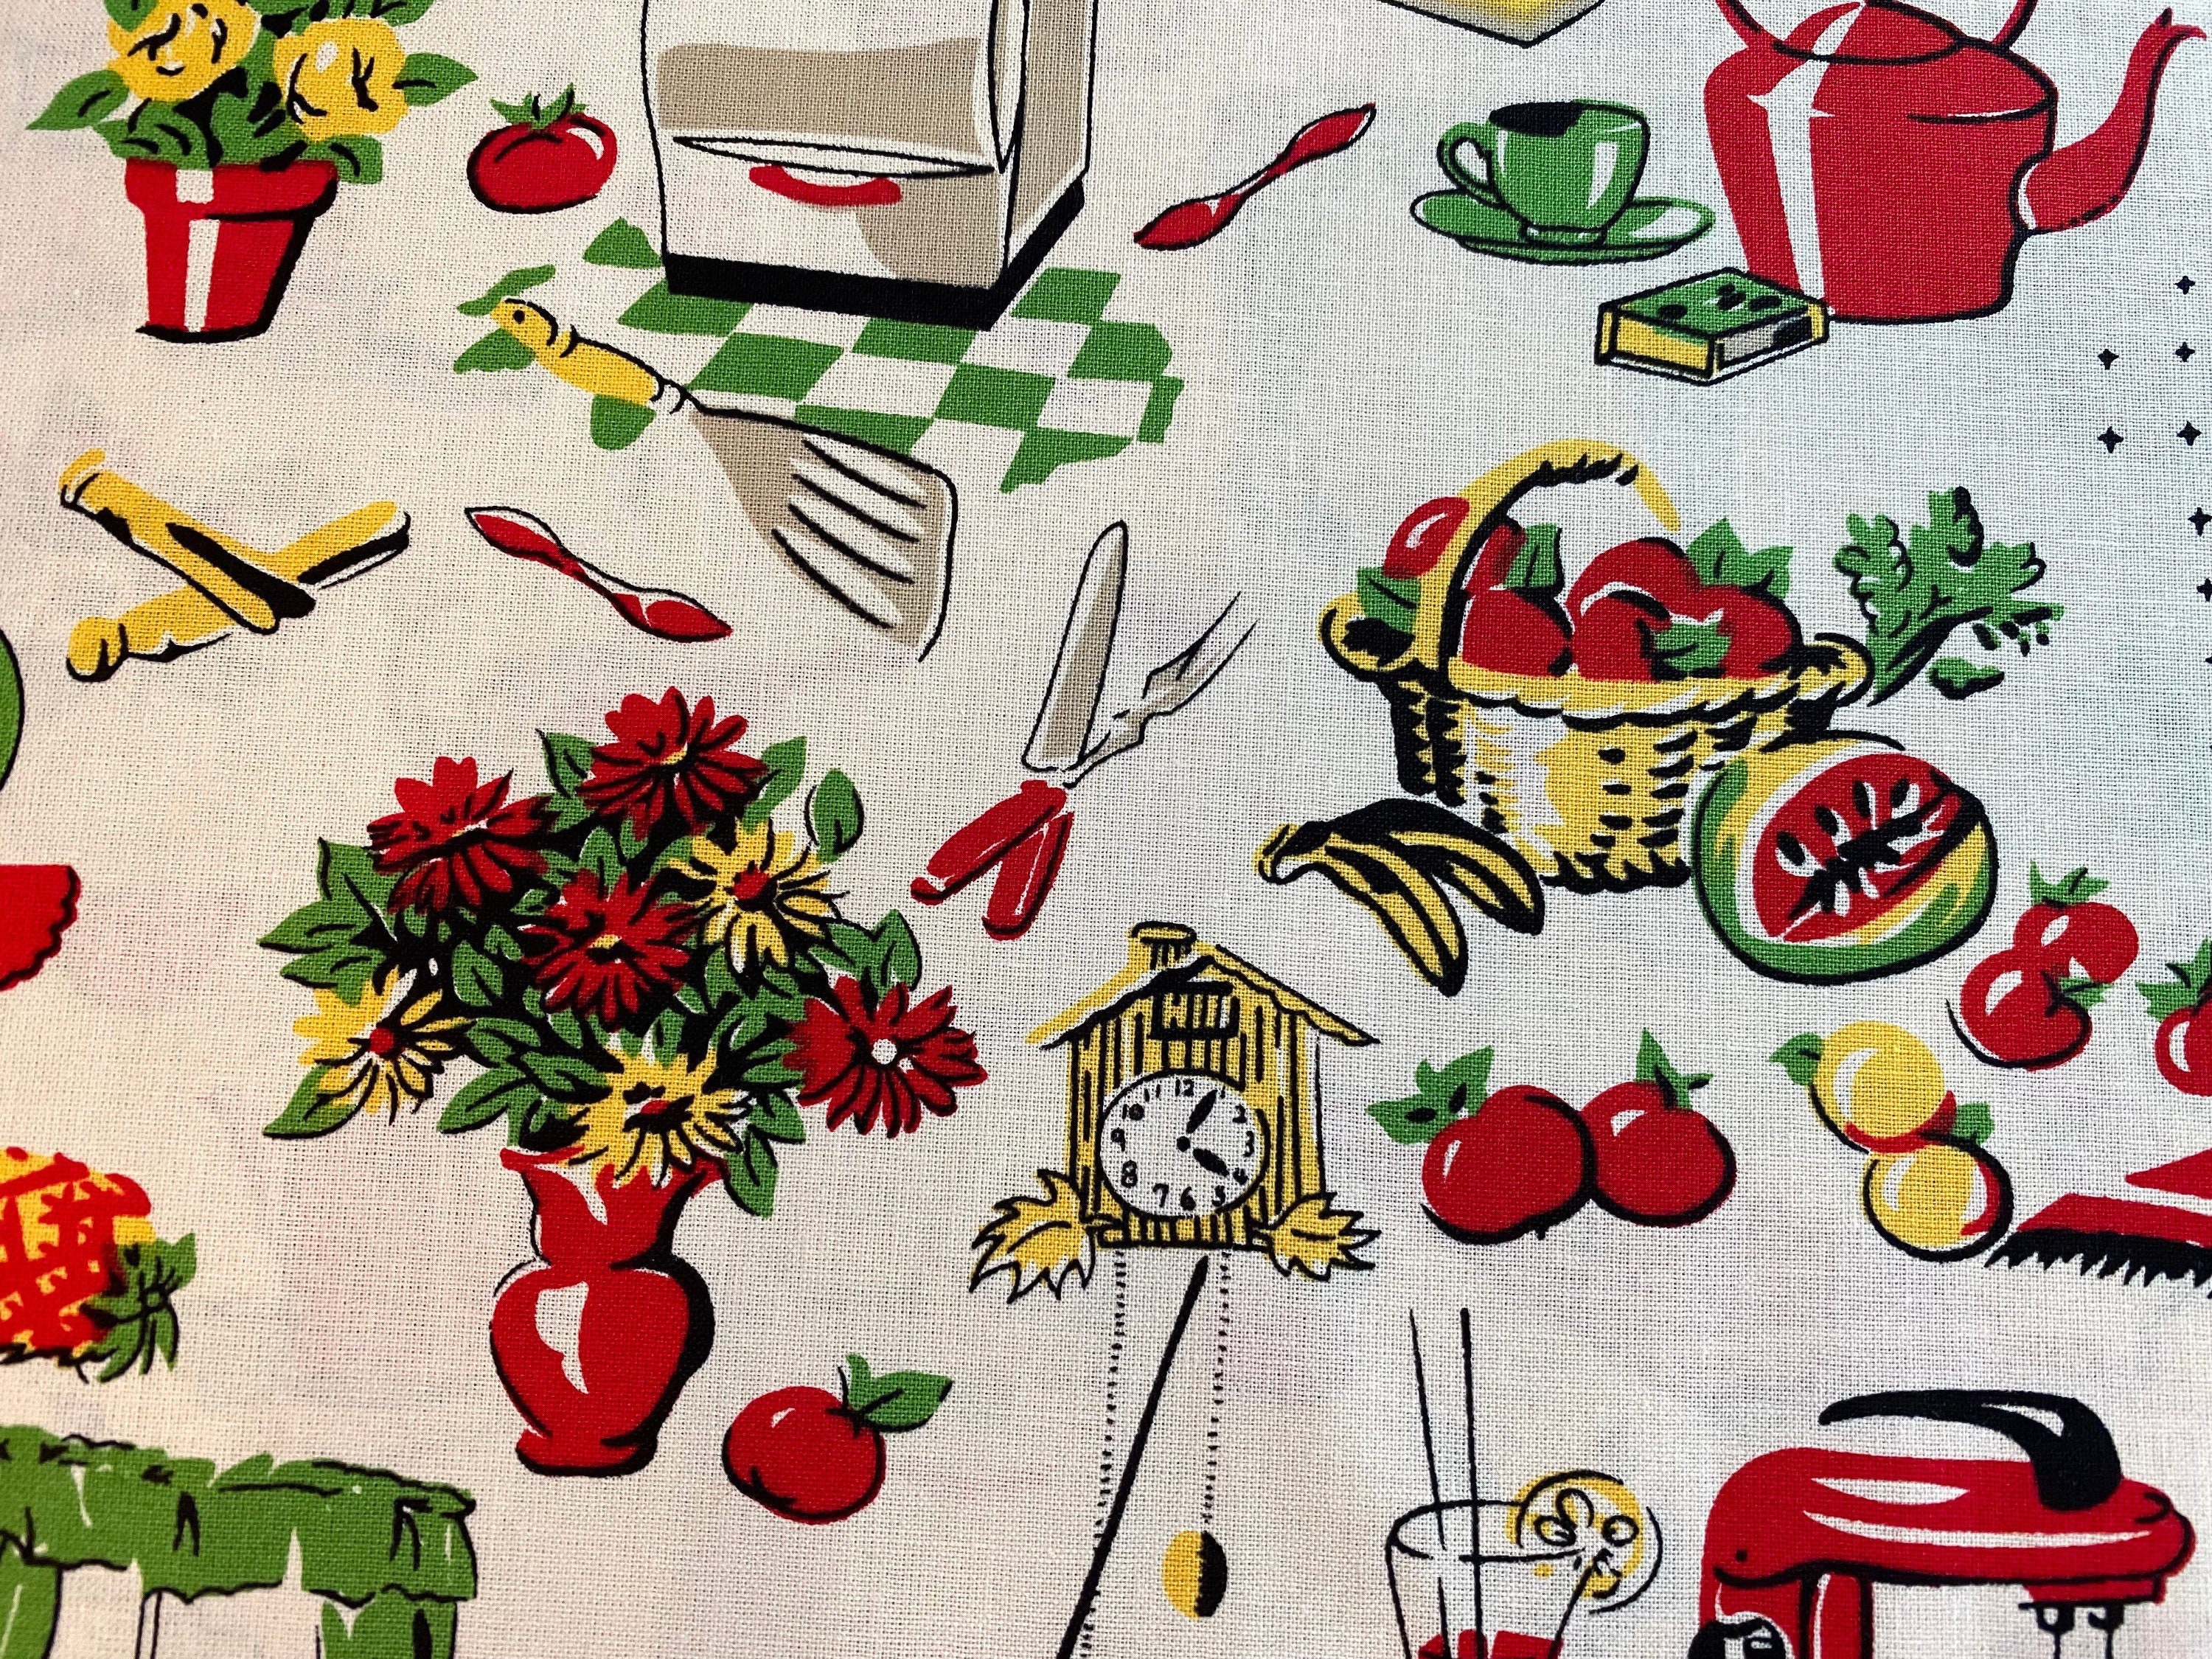 Michael Miller Fifties Kitchen Retro 50's Kitchen Appliances on Cream  Novelty Fabric100% Cotton Sold by the Yard 